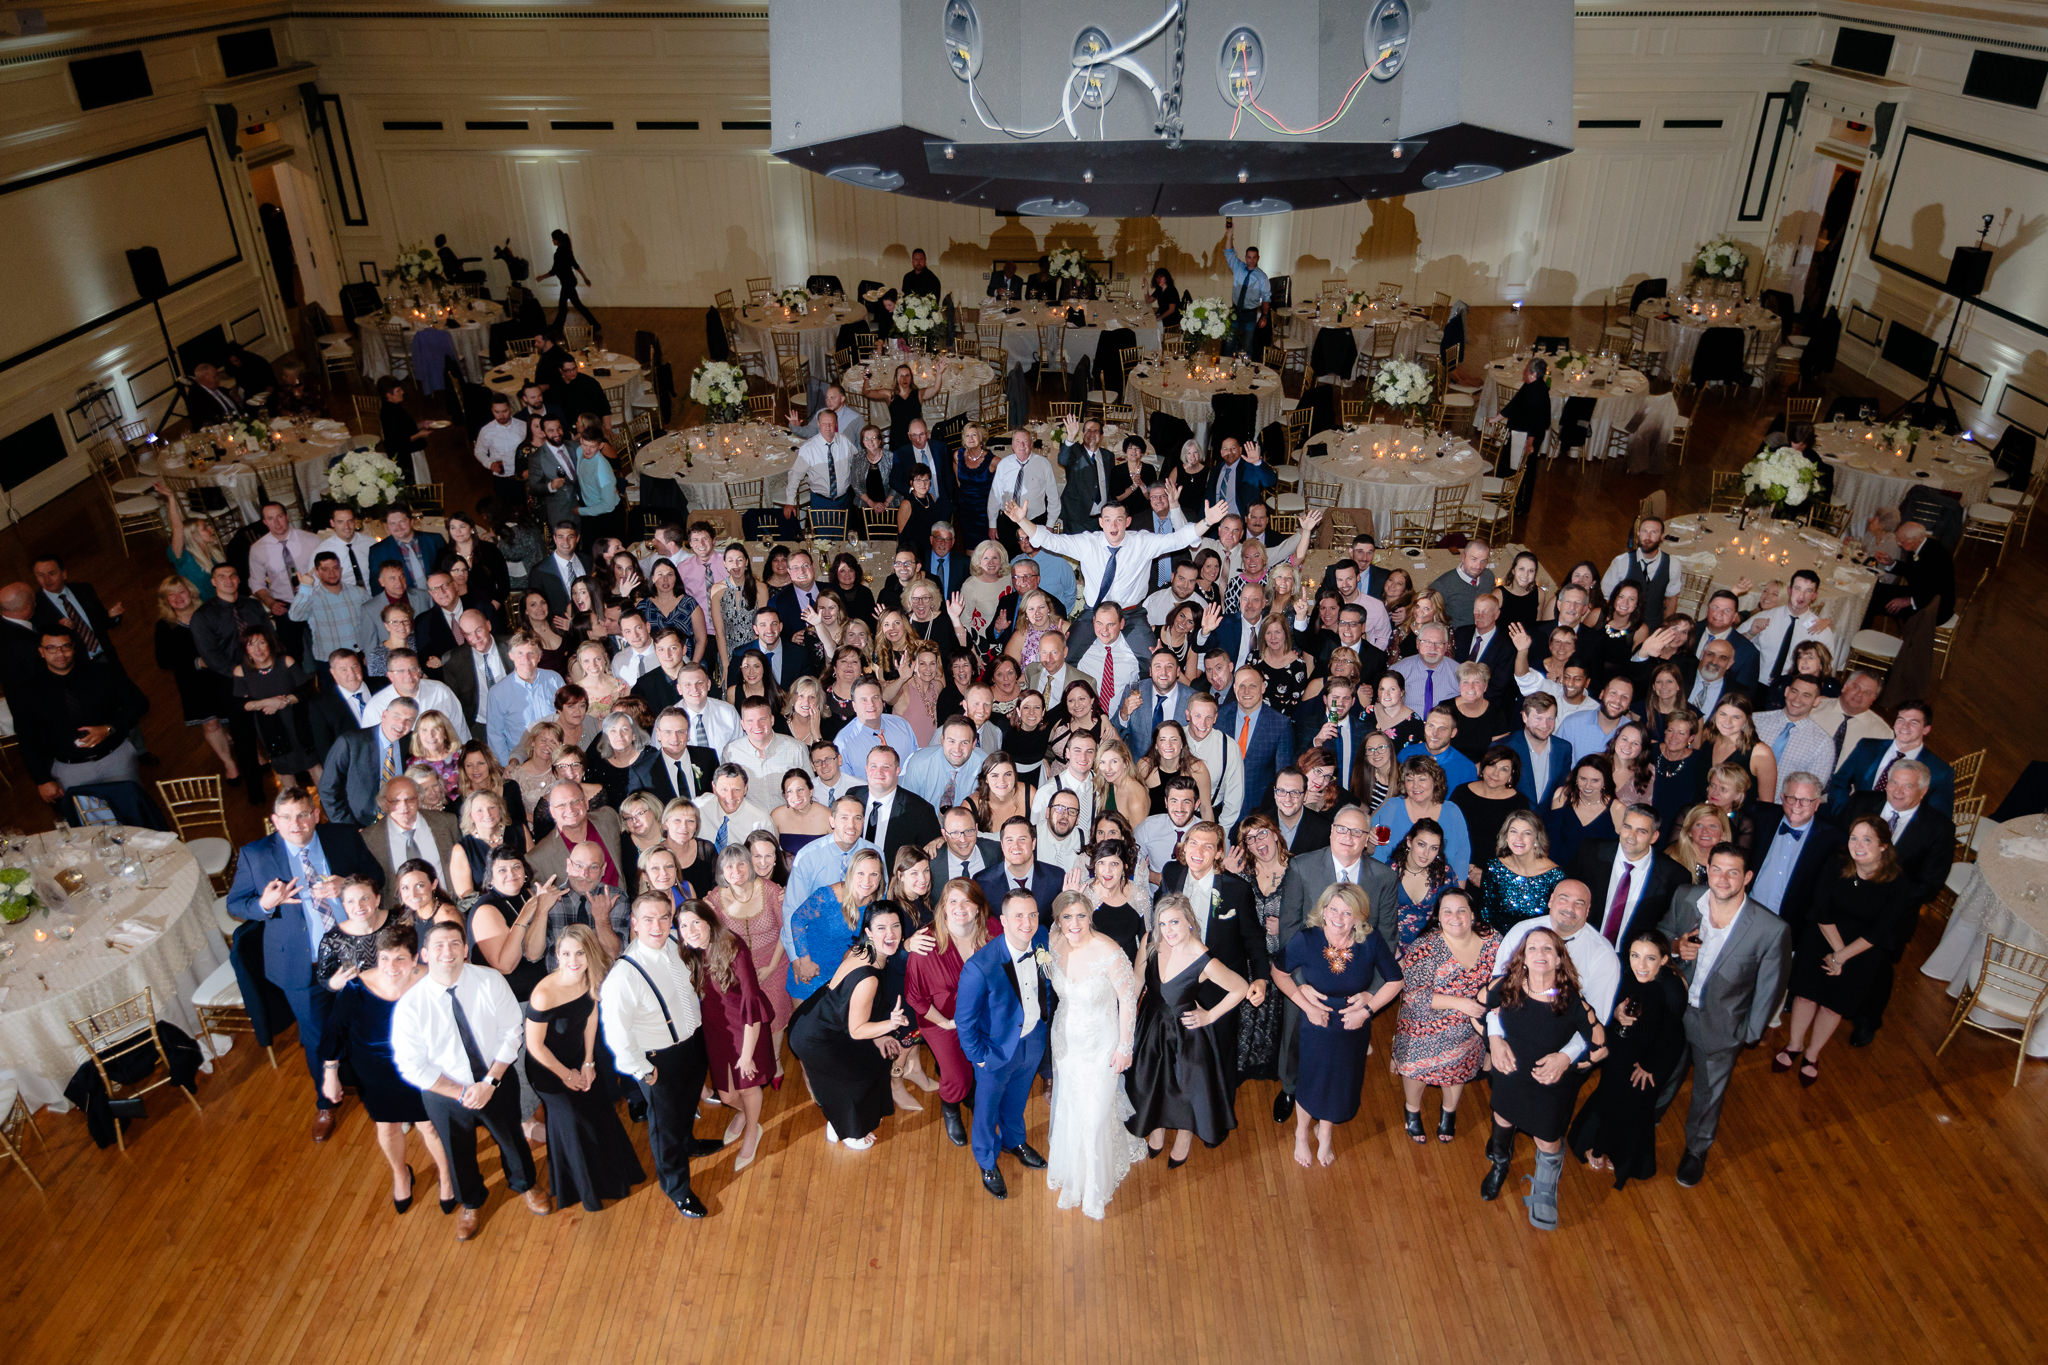 Group photo at a Soldiers & Sailors wedding reception